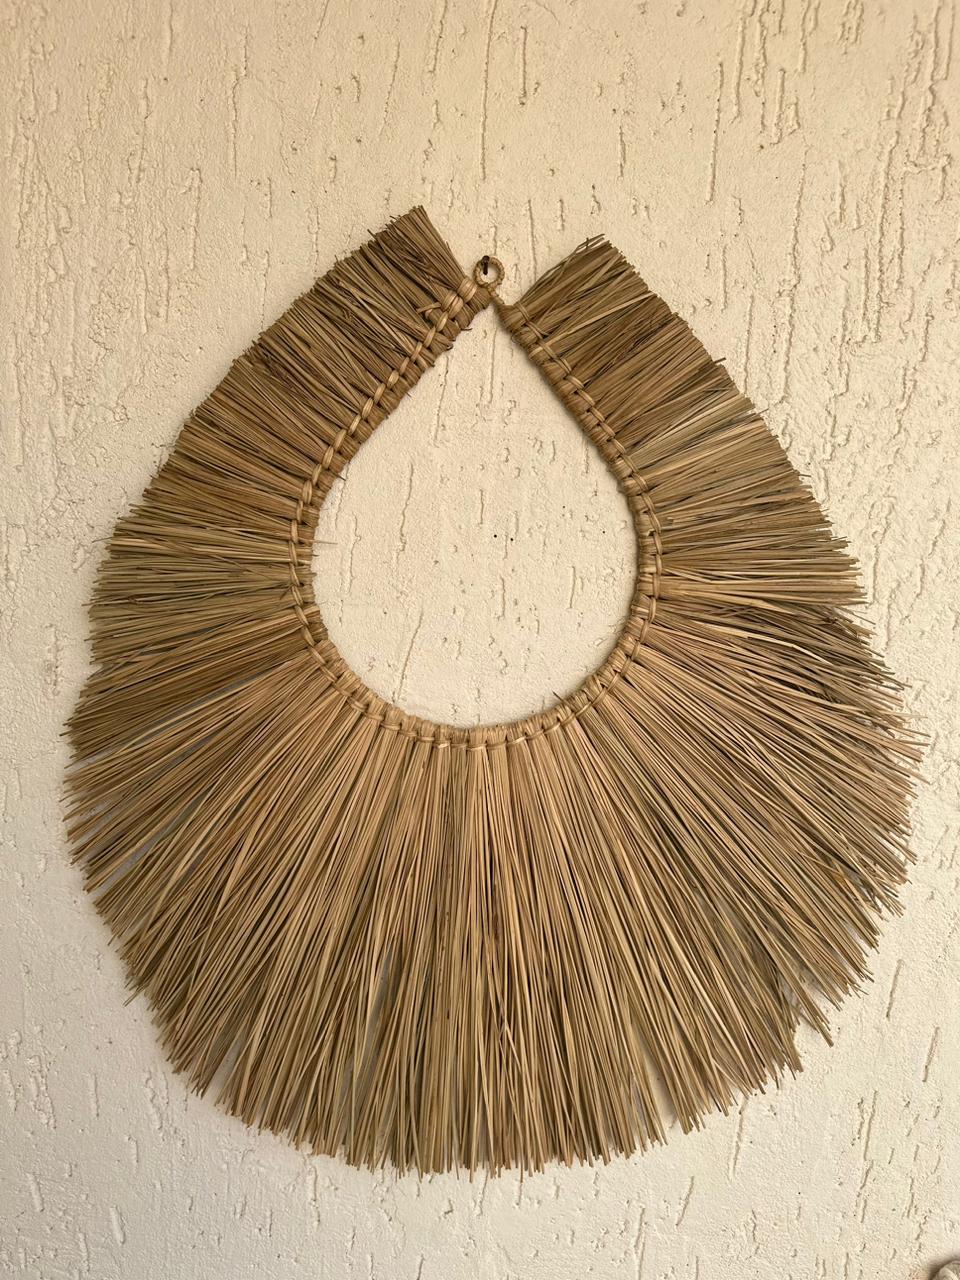 Enhance your Dream Home with our curated selection of premium Home Décor items. Dress up your boring white wall with our unique Sea Grass Hanging wall art. A perfect tint of design , this sea grass wall decor will make your walls alive and gives a rustic and bohemian touch to the ambience. tesu